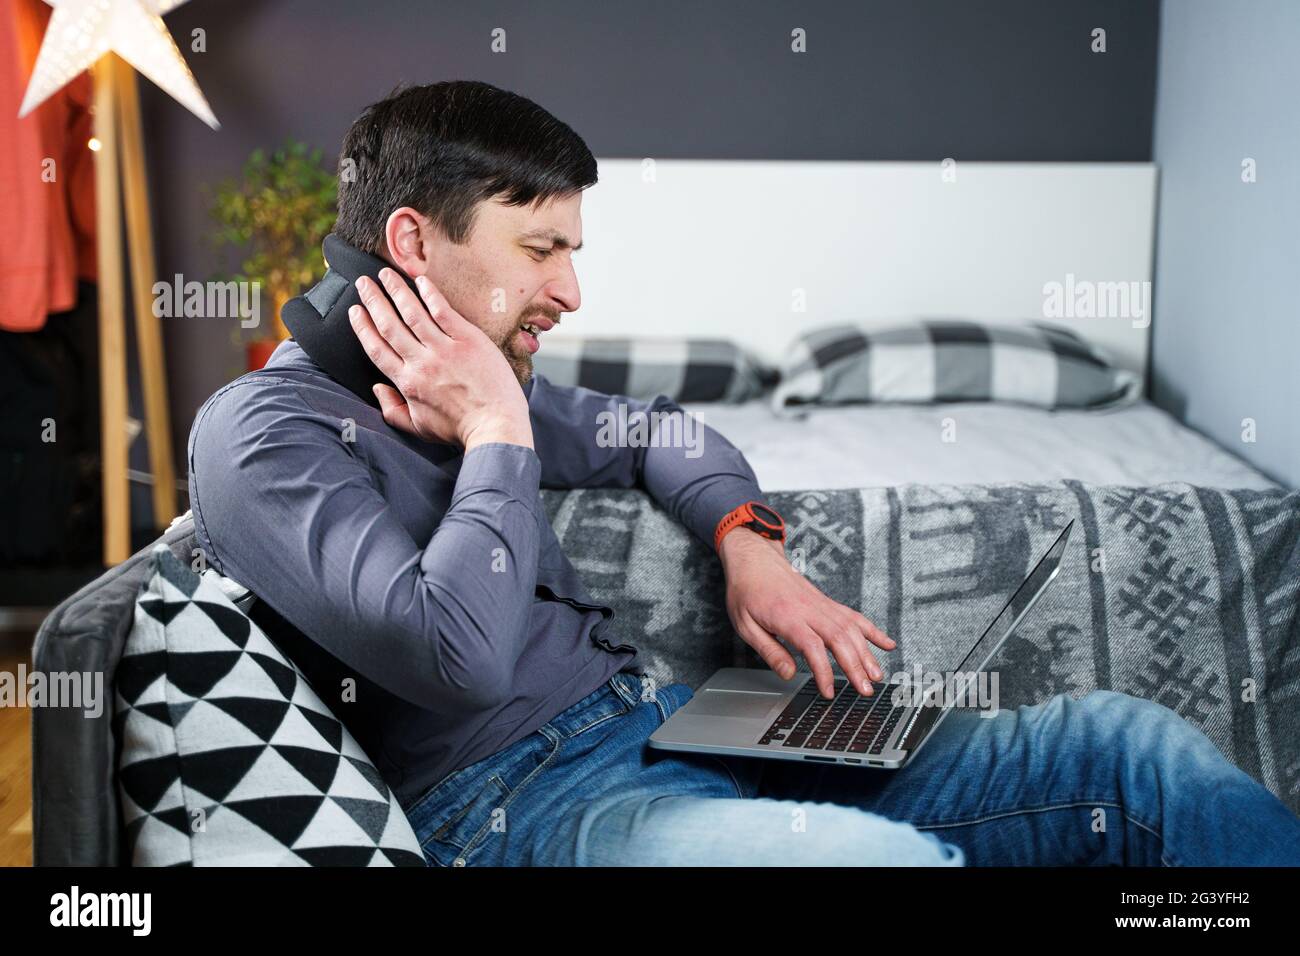 Tired strained man suffering from neck pain while working at computer. Male touchingly massages neck, puts on neck collar, sitti Stock Photo